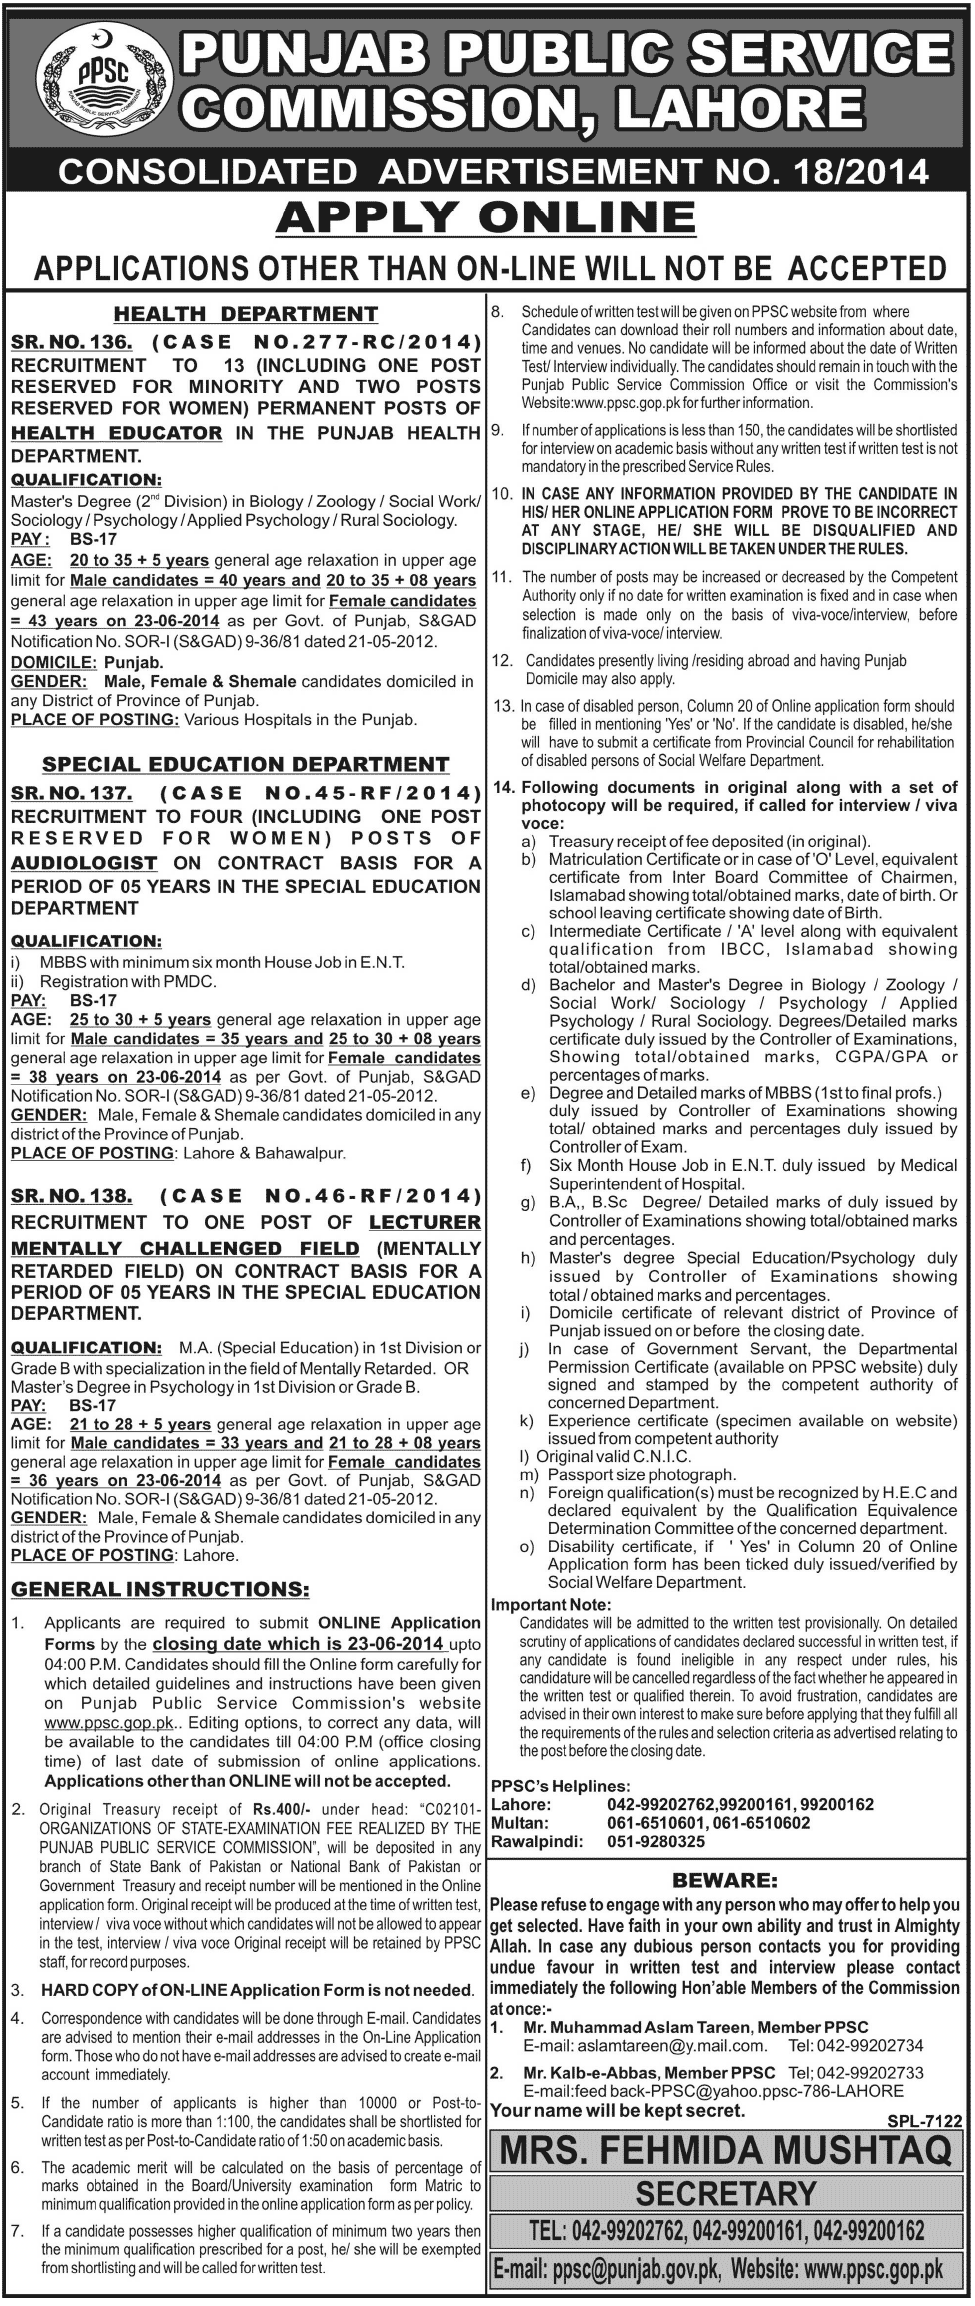 PPSC Jobs June 2014 Consolidated Advertisement 18/2014